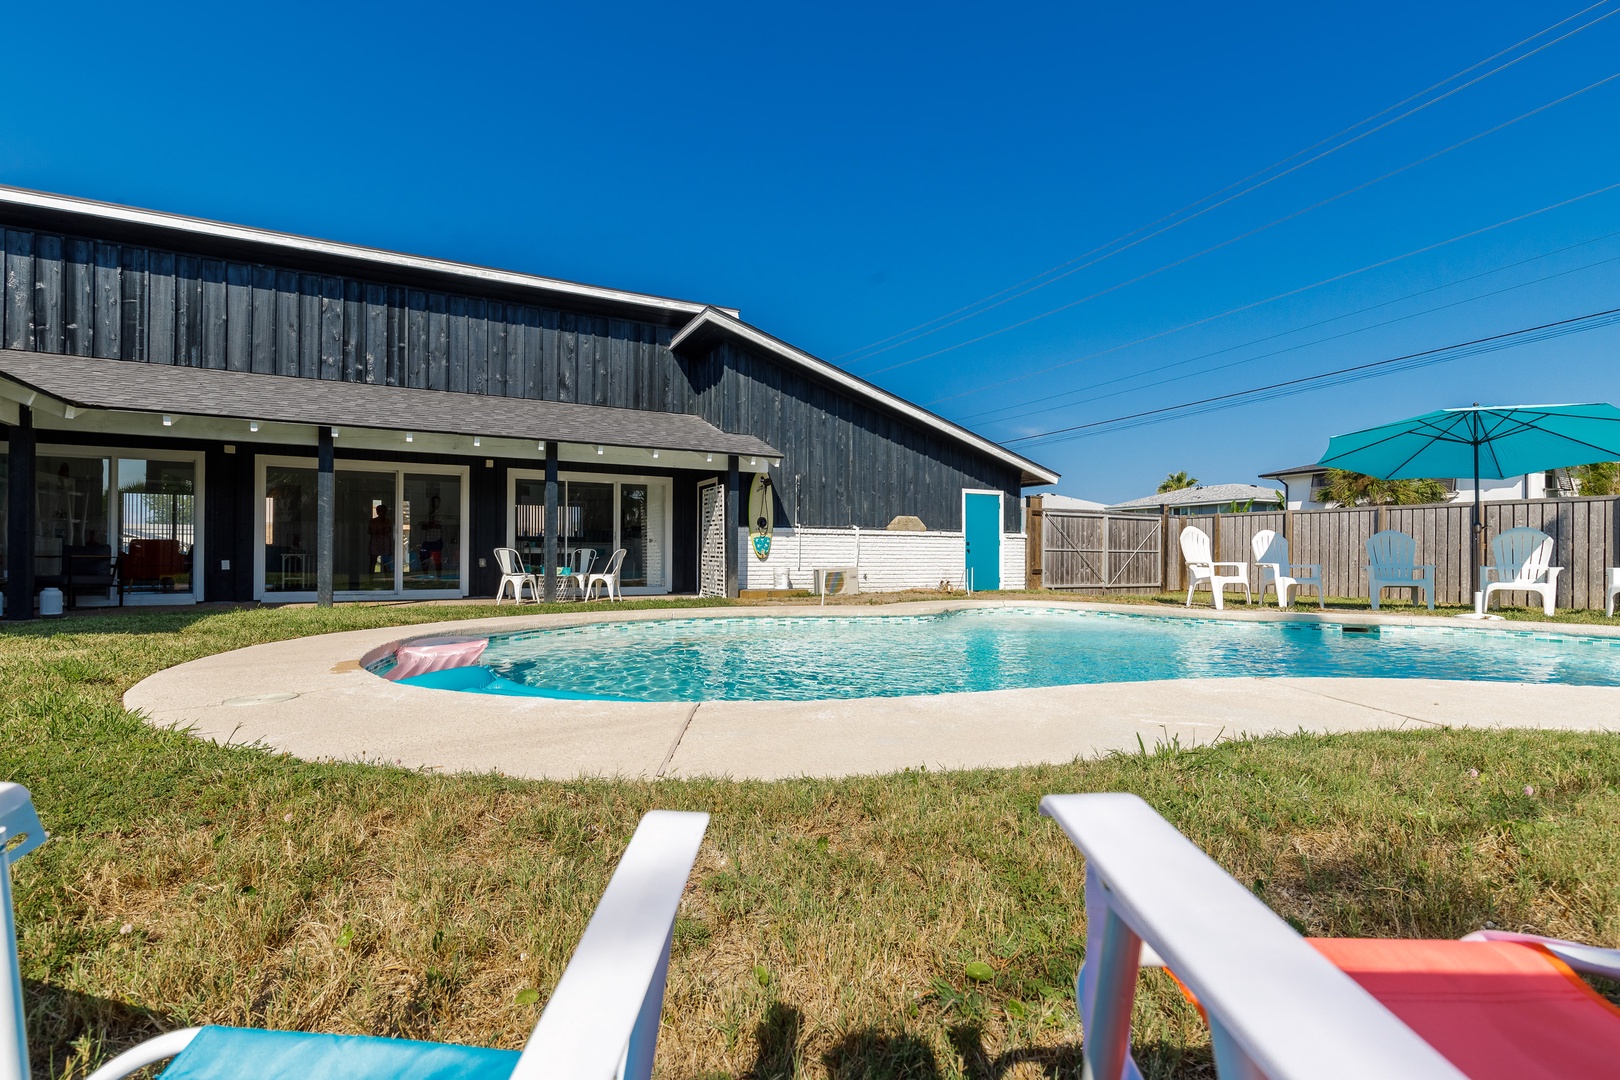 The fenced back yard & pool offer loads of space for relaxation & play